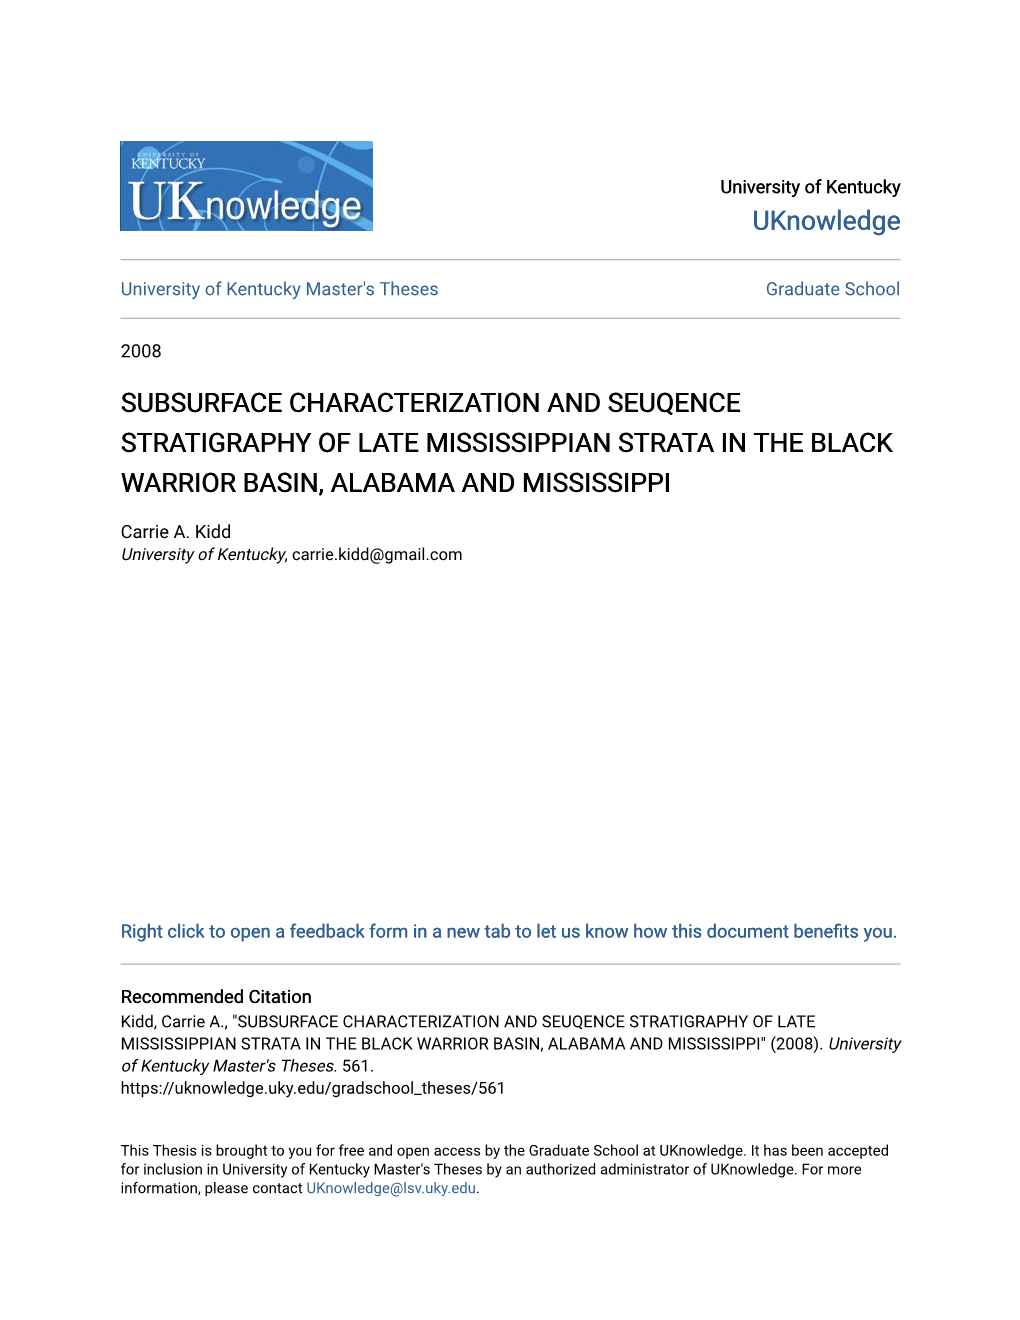 Subsurface Characterization and Seuqence Stratigraphy of Late Mississippian Strata in the Black Warrior Basin, Alabama and Mississippi